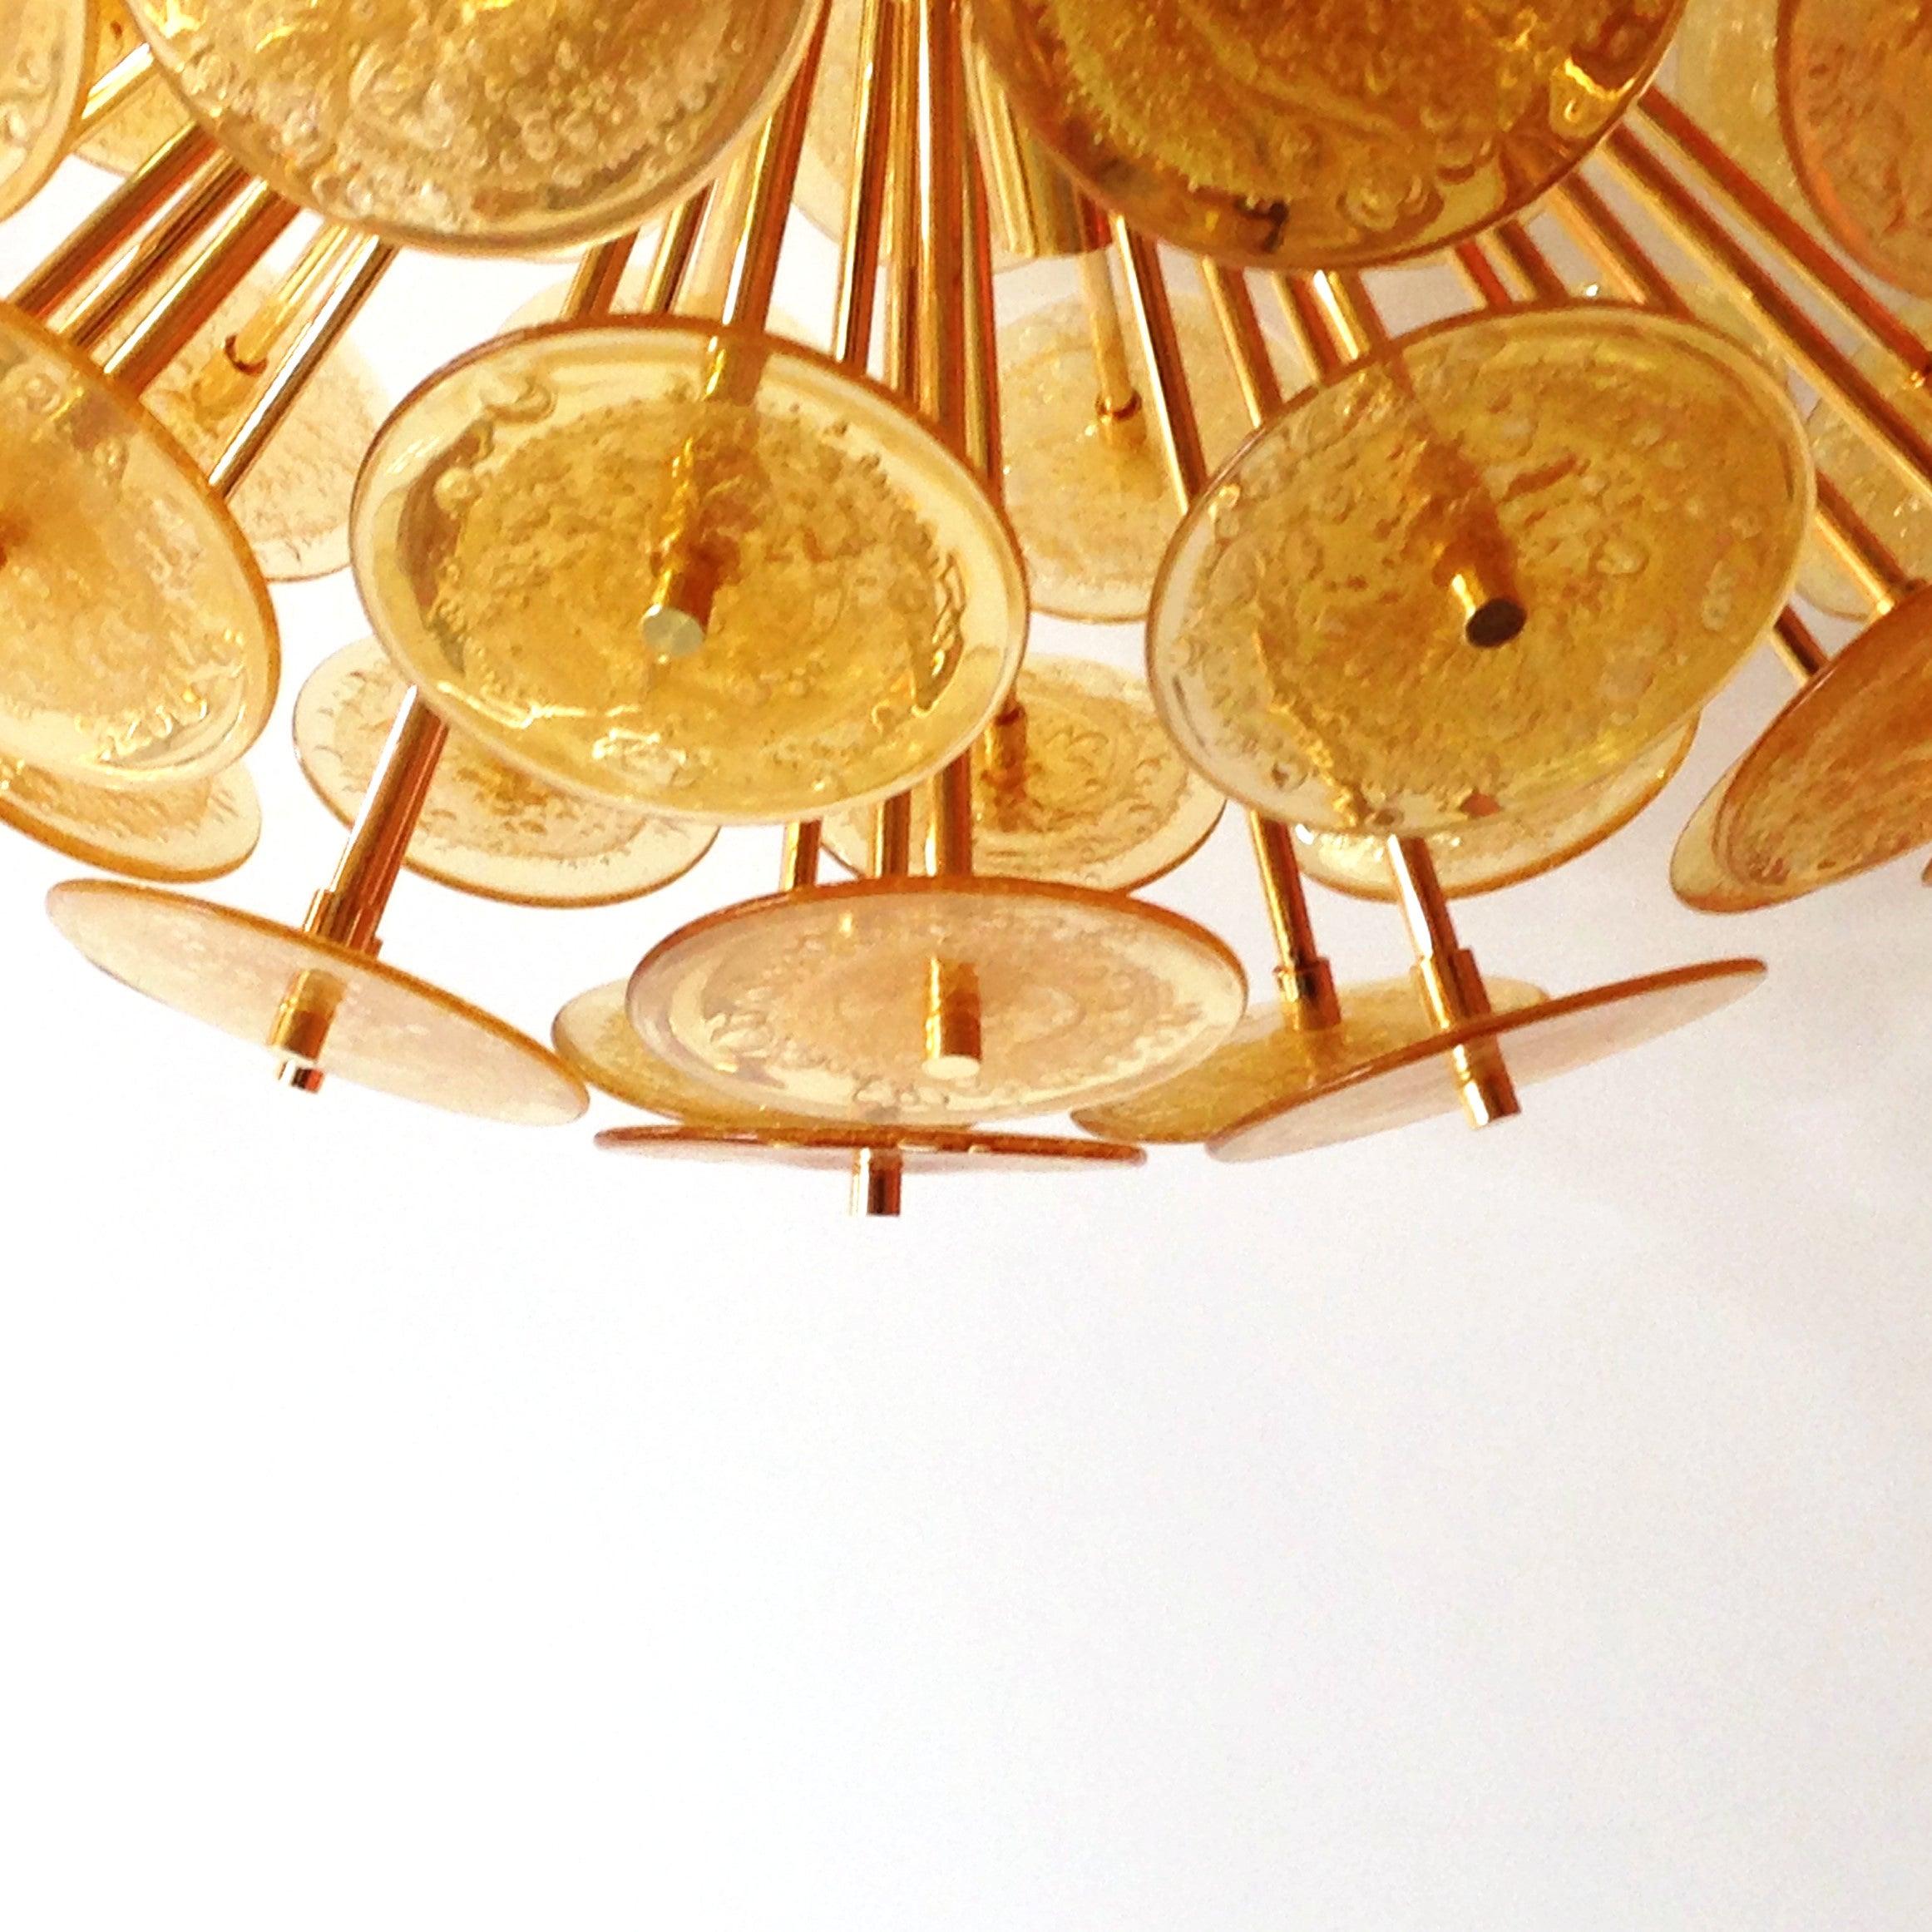 Italian round sputnik chandelier with amber Murano glass discs blown with bubbles using Pulegoso technique, mounted on 24-karat gold-plated metal frame by Fabio Ltd / Made in Italy
12 lights / E26 or E27 type / max 60W each
Measures: Diameter 37.5